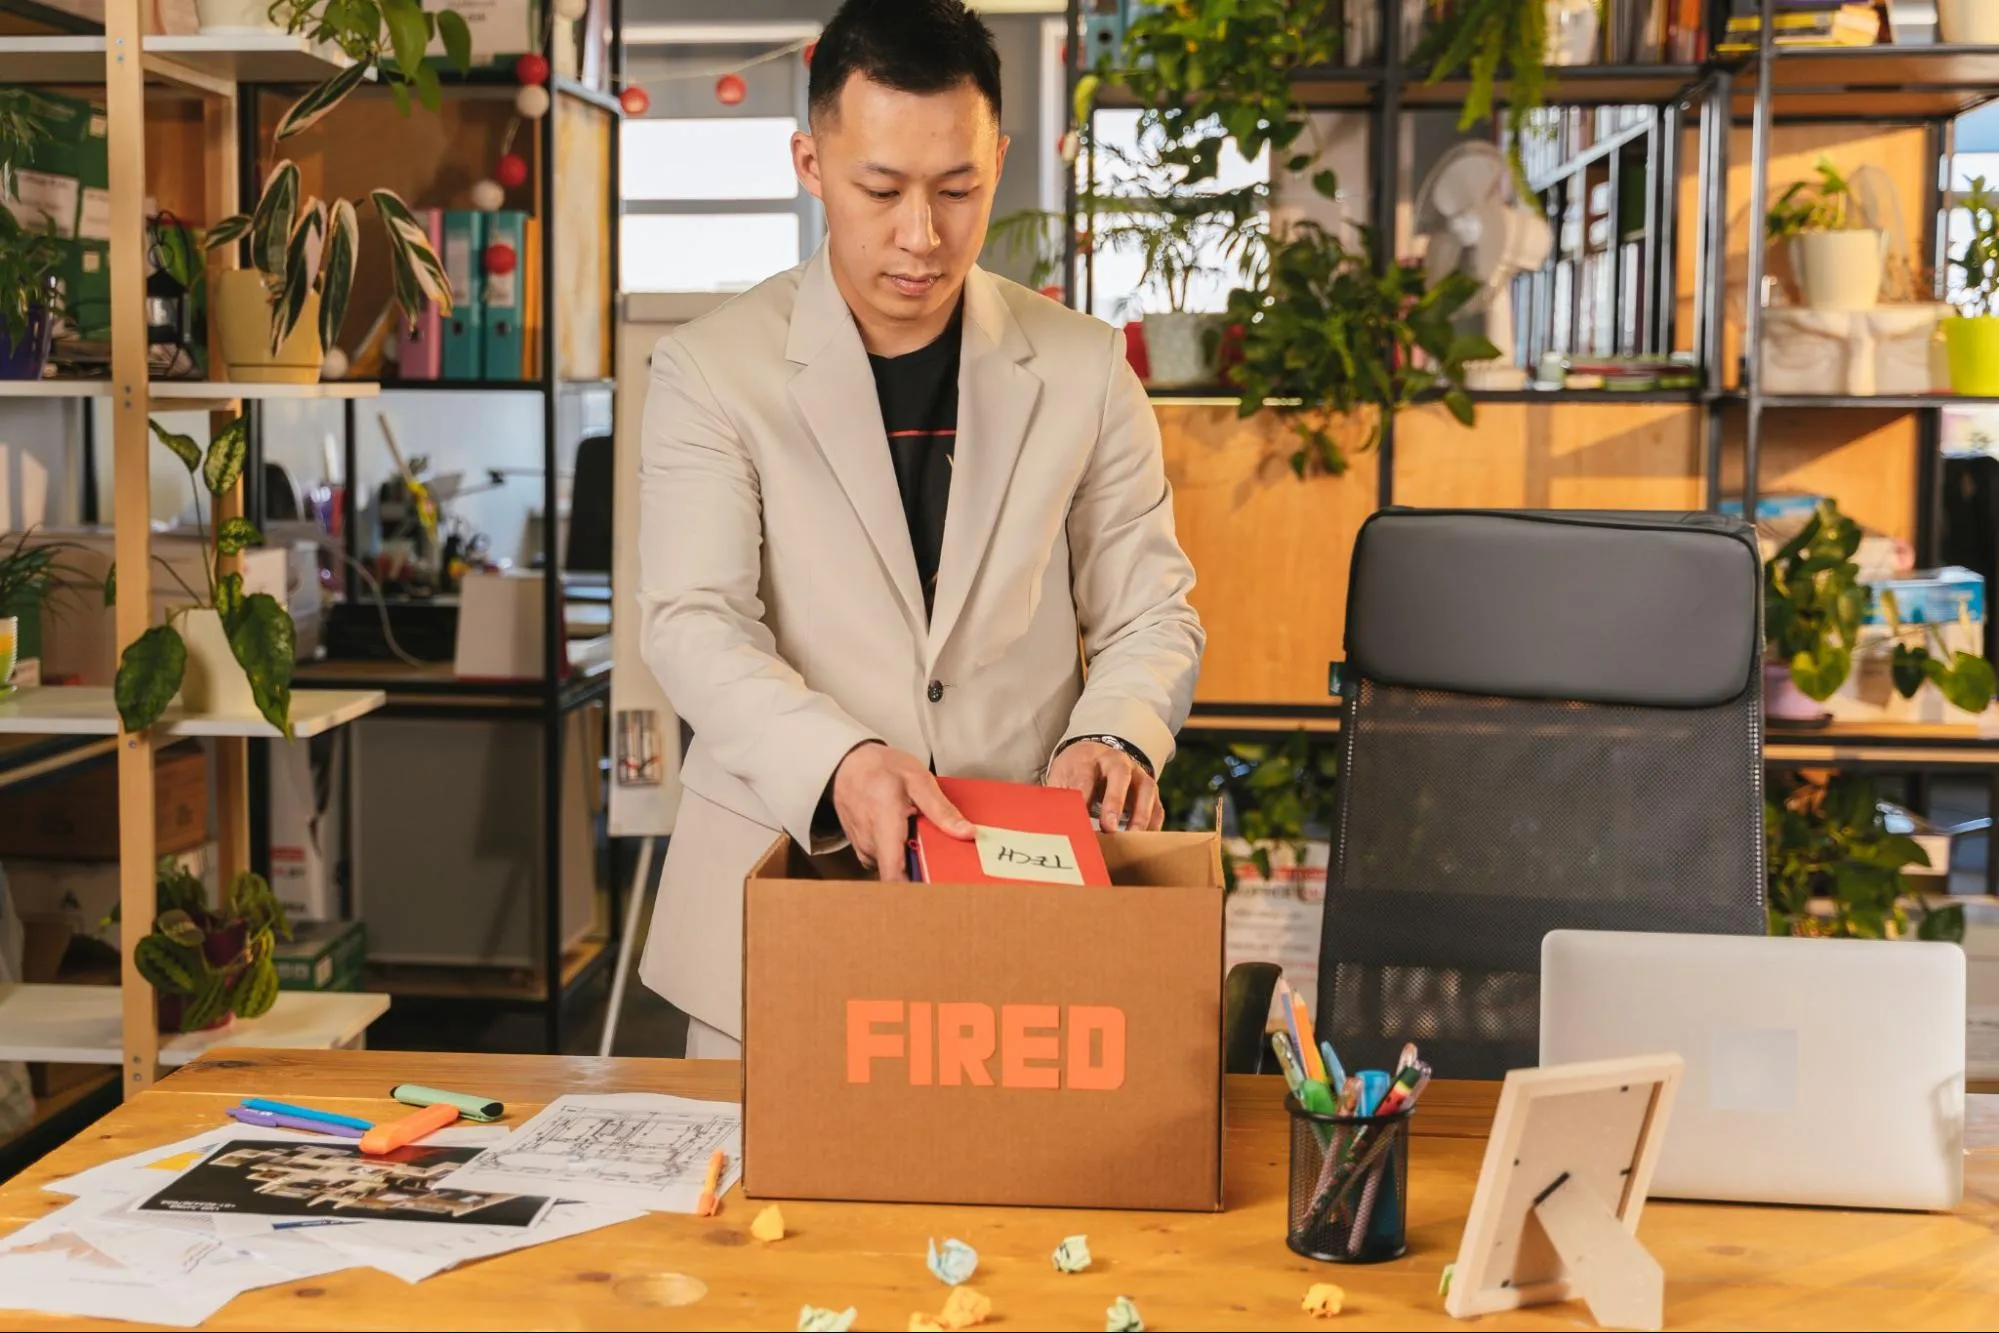 What Are Some Reasons to Terminate an Employee?